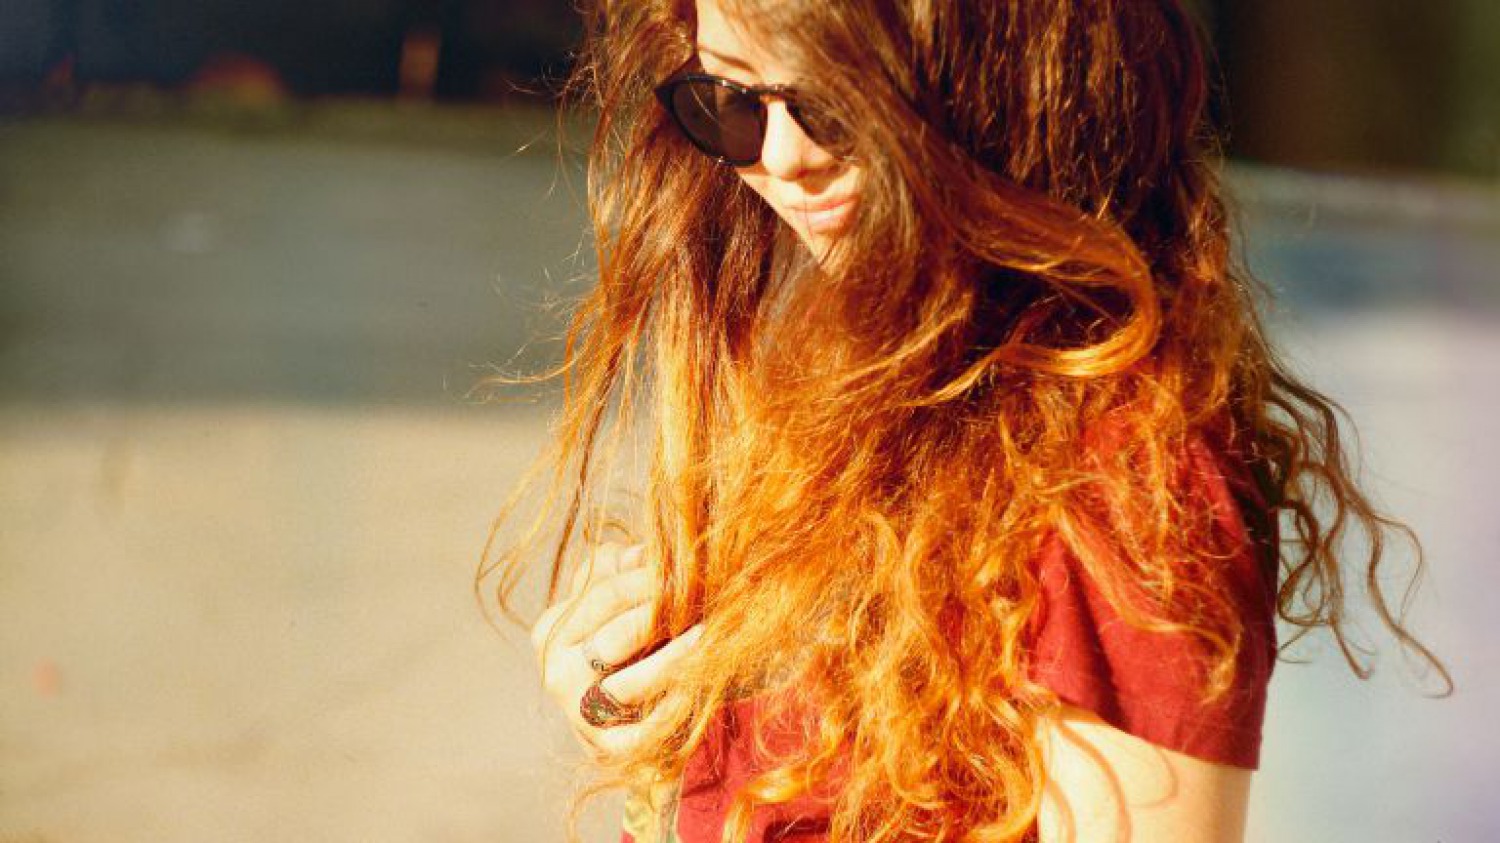 So long, Ombré: when to wear your natural growth with pride